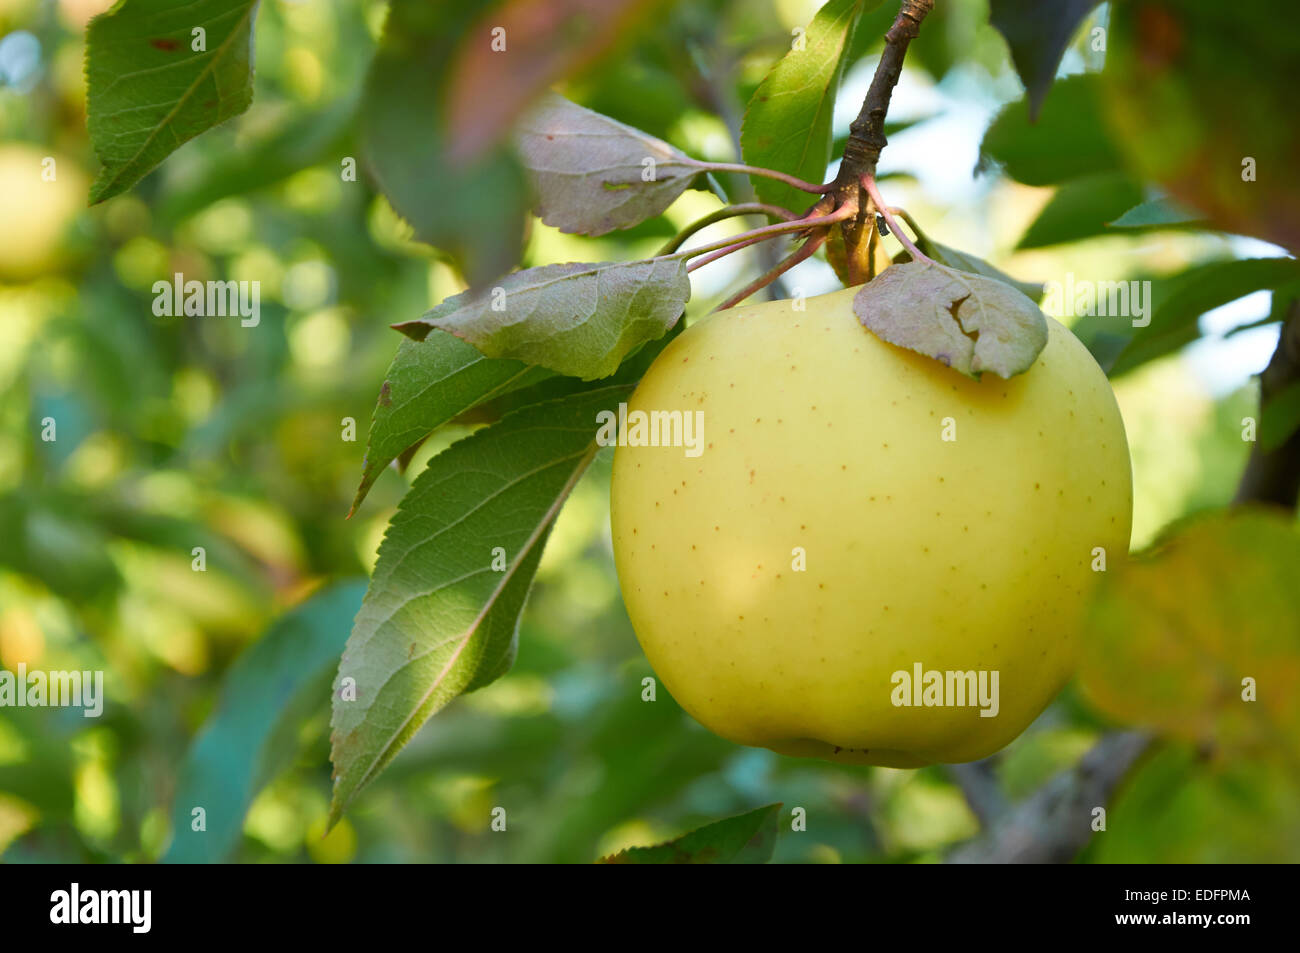 Ripe green yellow apple on the branch Stock Photo